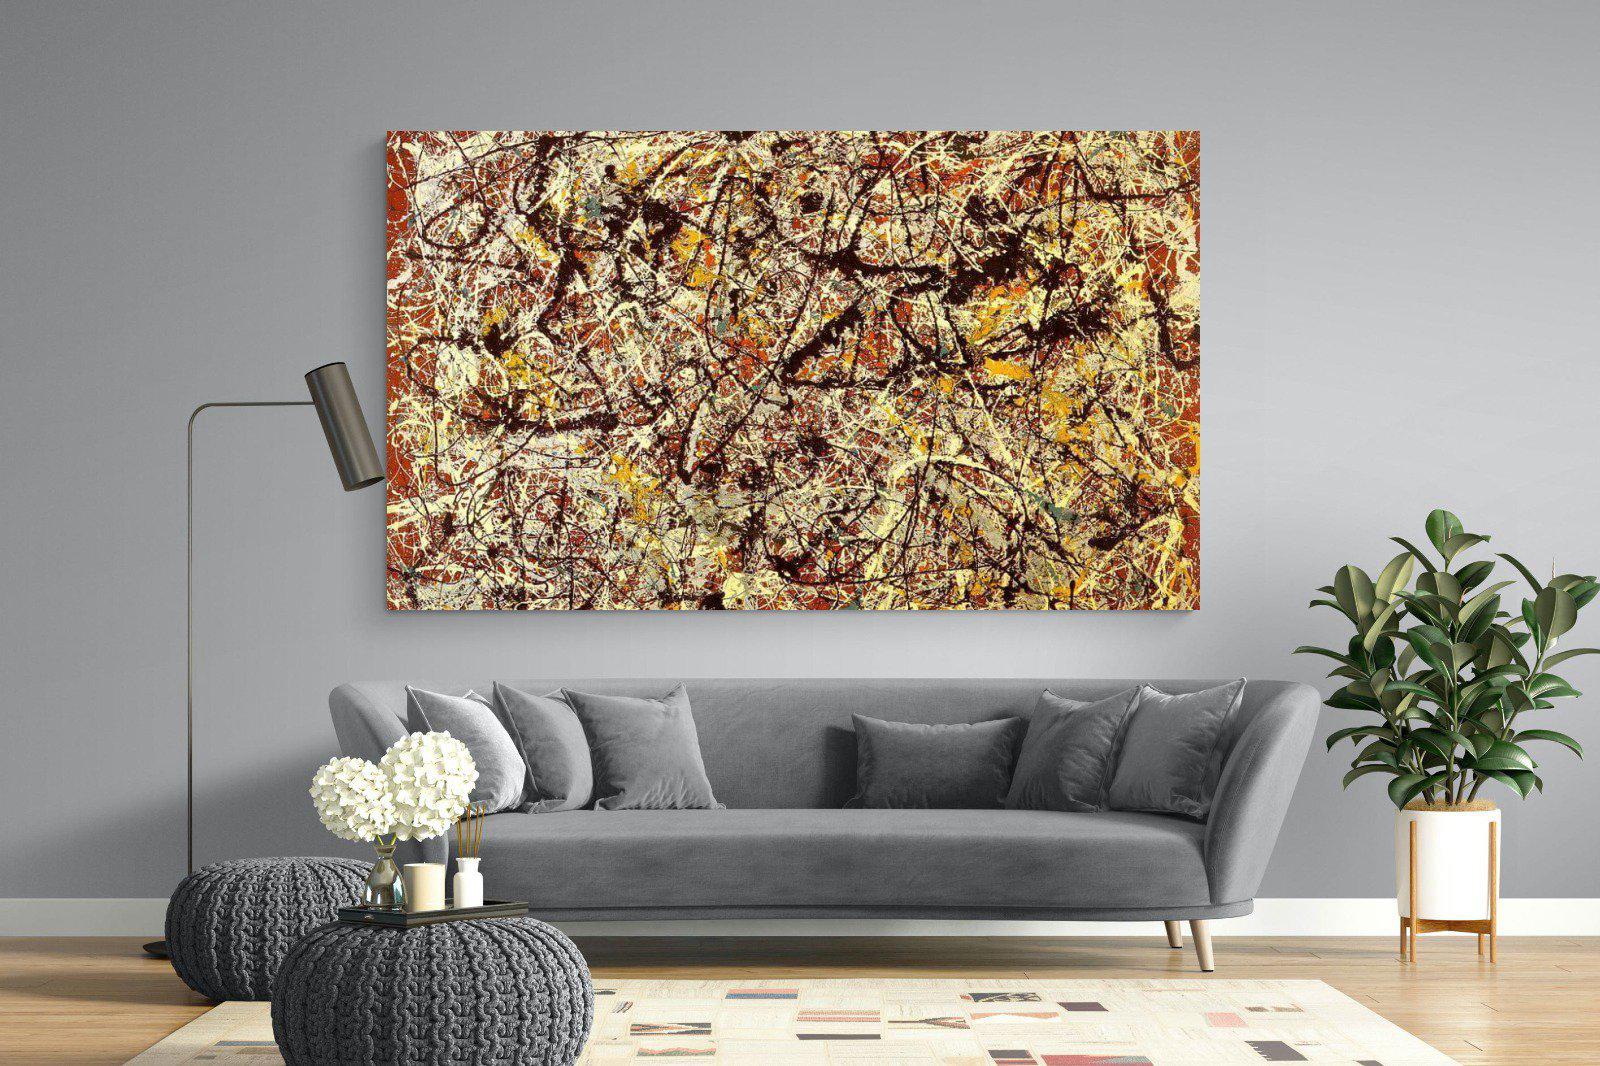 Mural on Indian Red Ground-Wall_Art-220 x 130cm-Mounted Canvas-No Frame-Pixalot